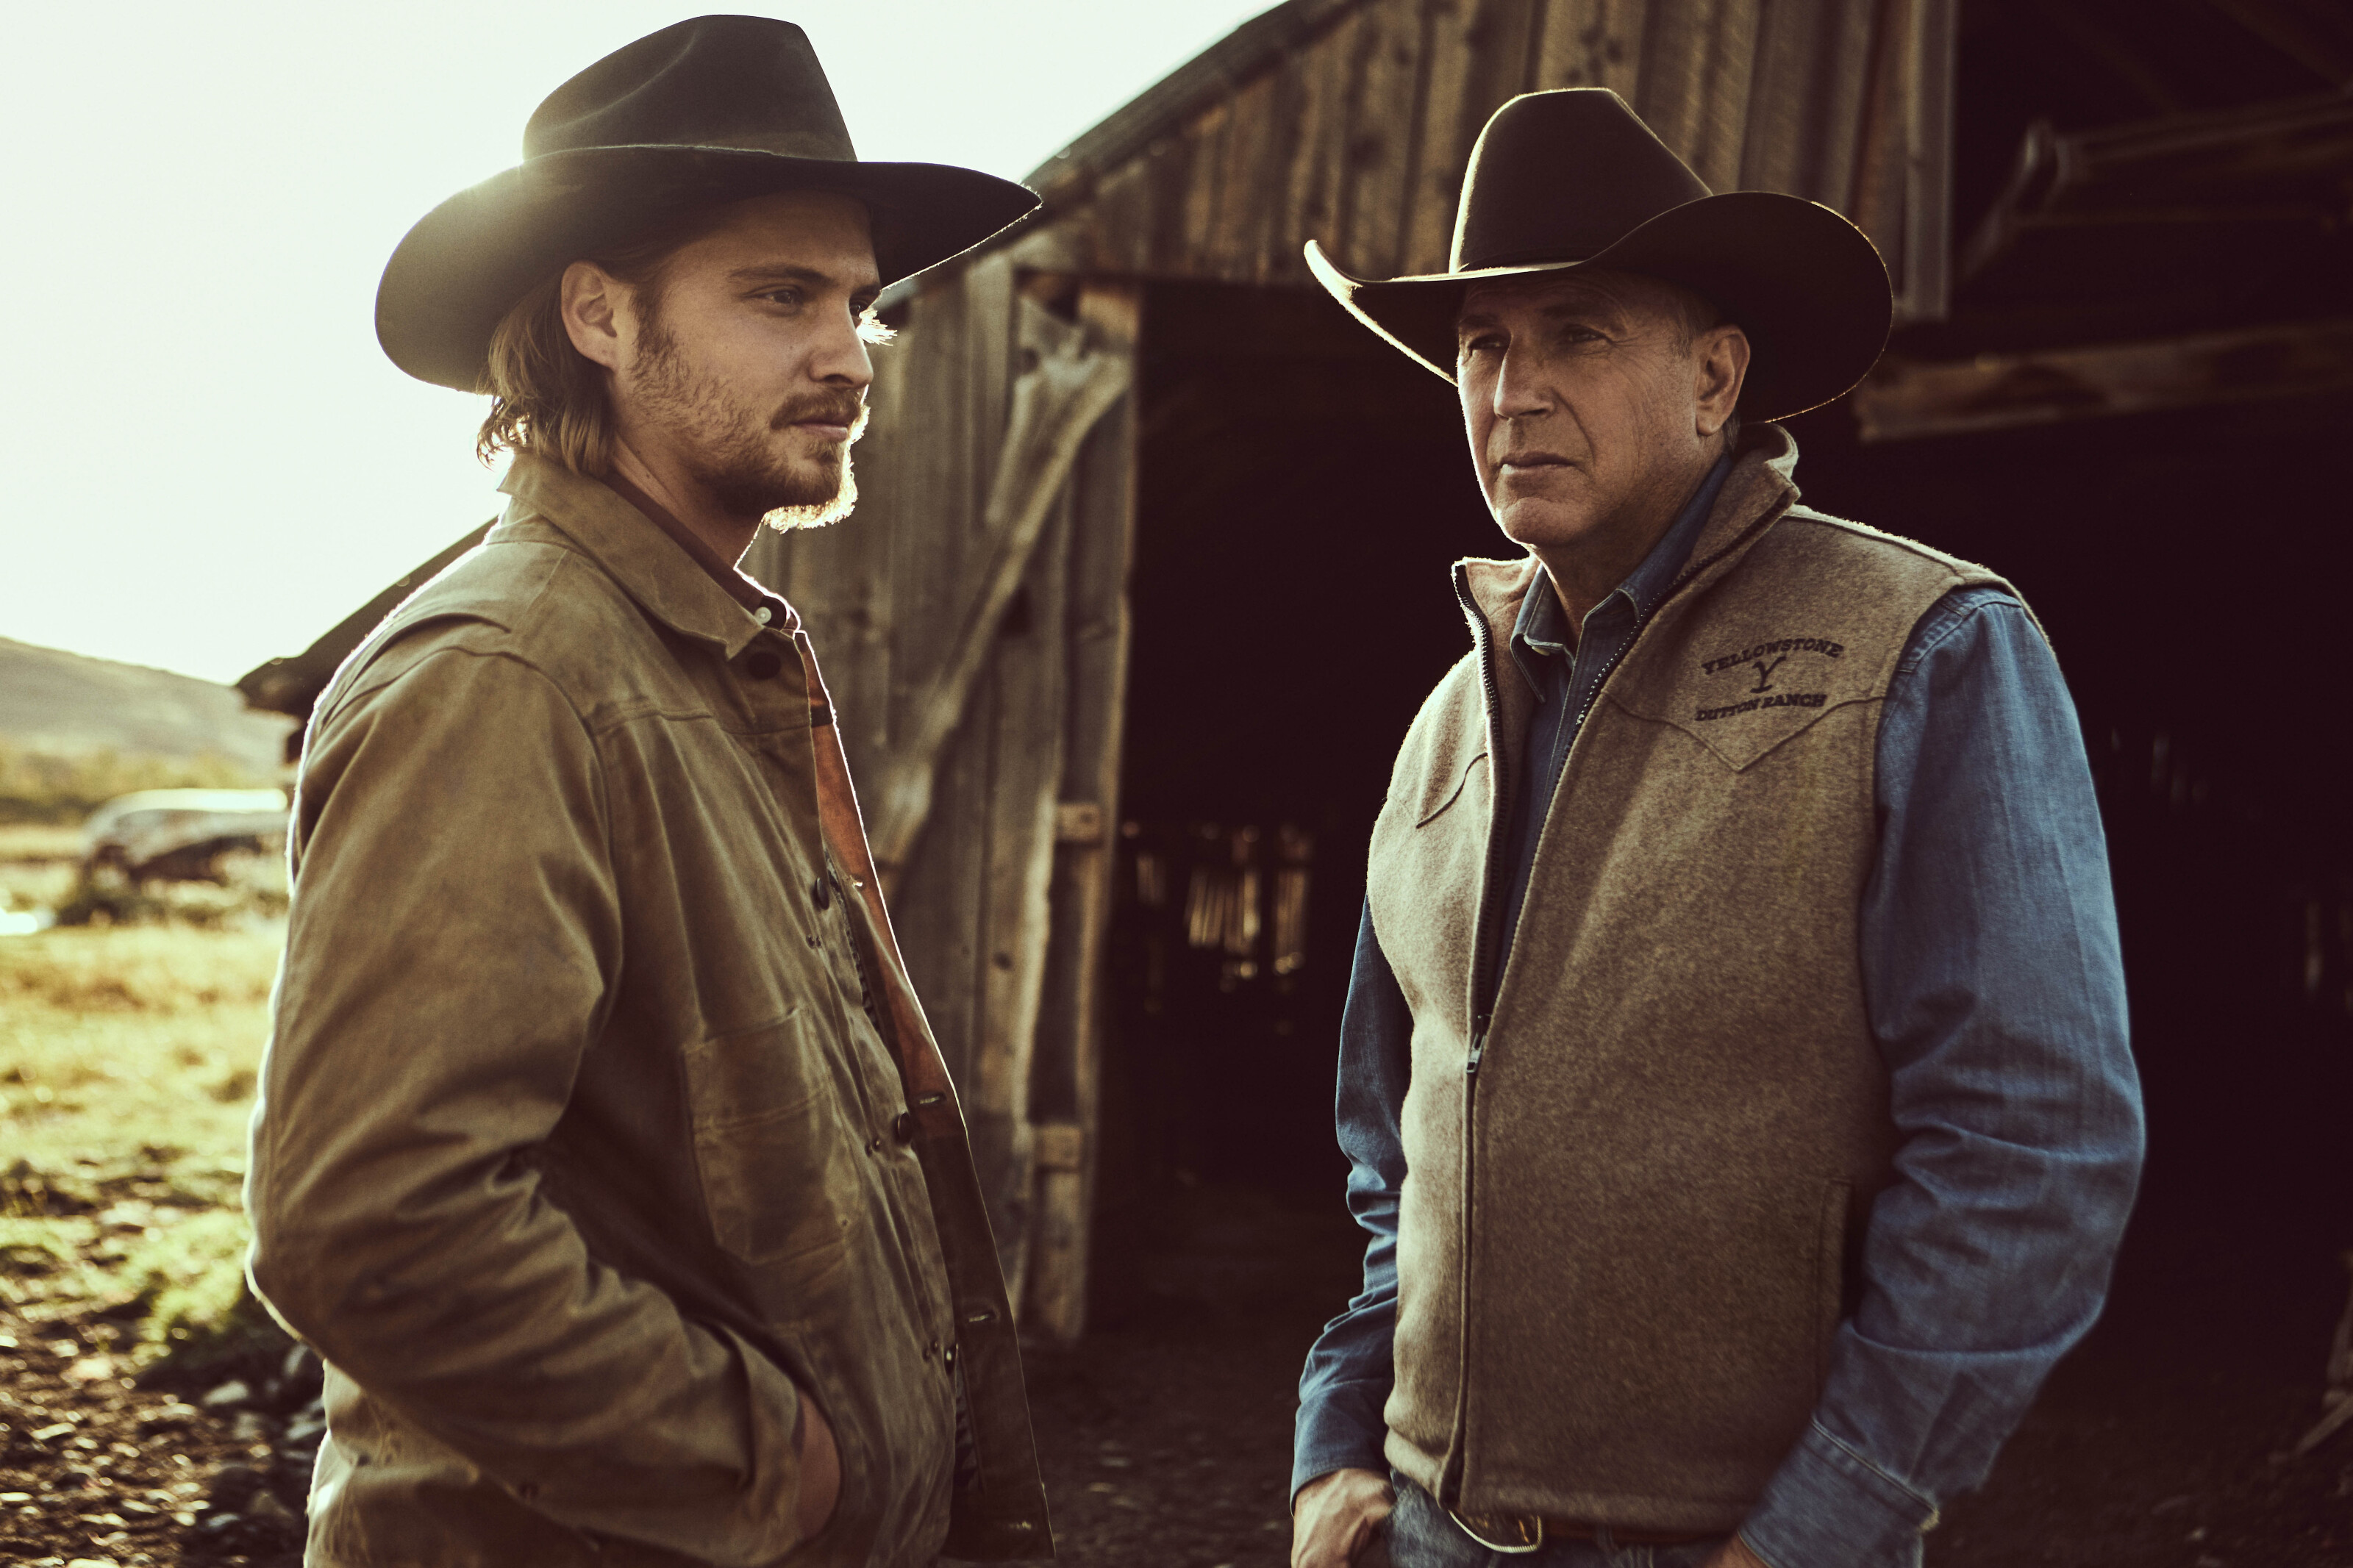 Yellowstone season 5 is not coming to Paramount Network in September